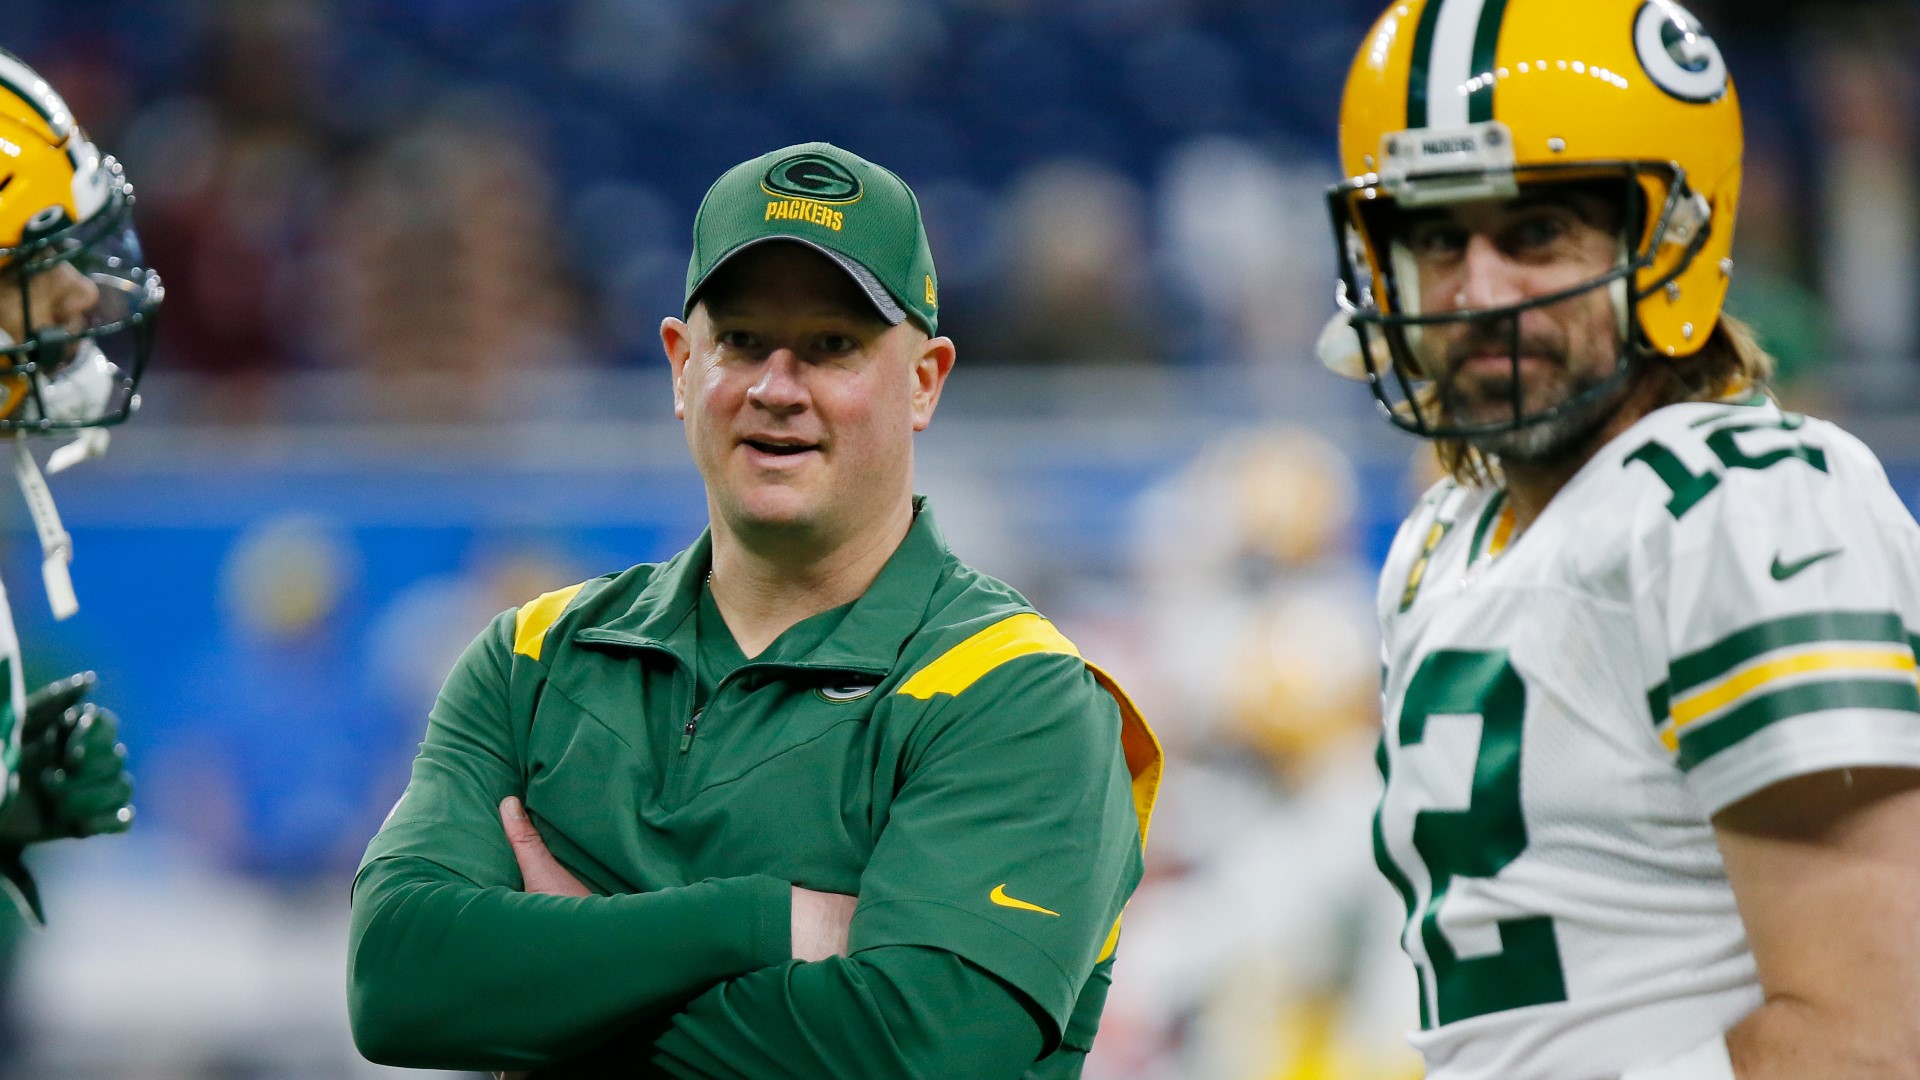 Rodgers is expected to reveal by Tuesday whether he will return to Green Bay or move on. Mike Klis discusses that and other Denver Broncos news.